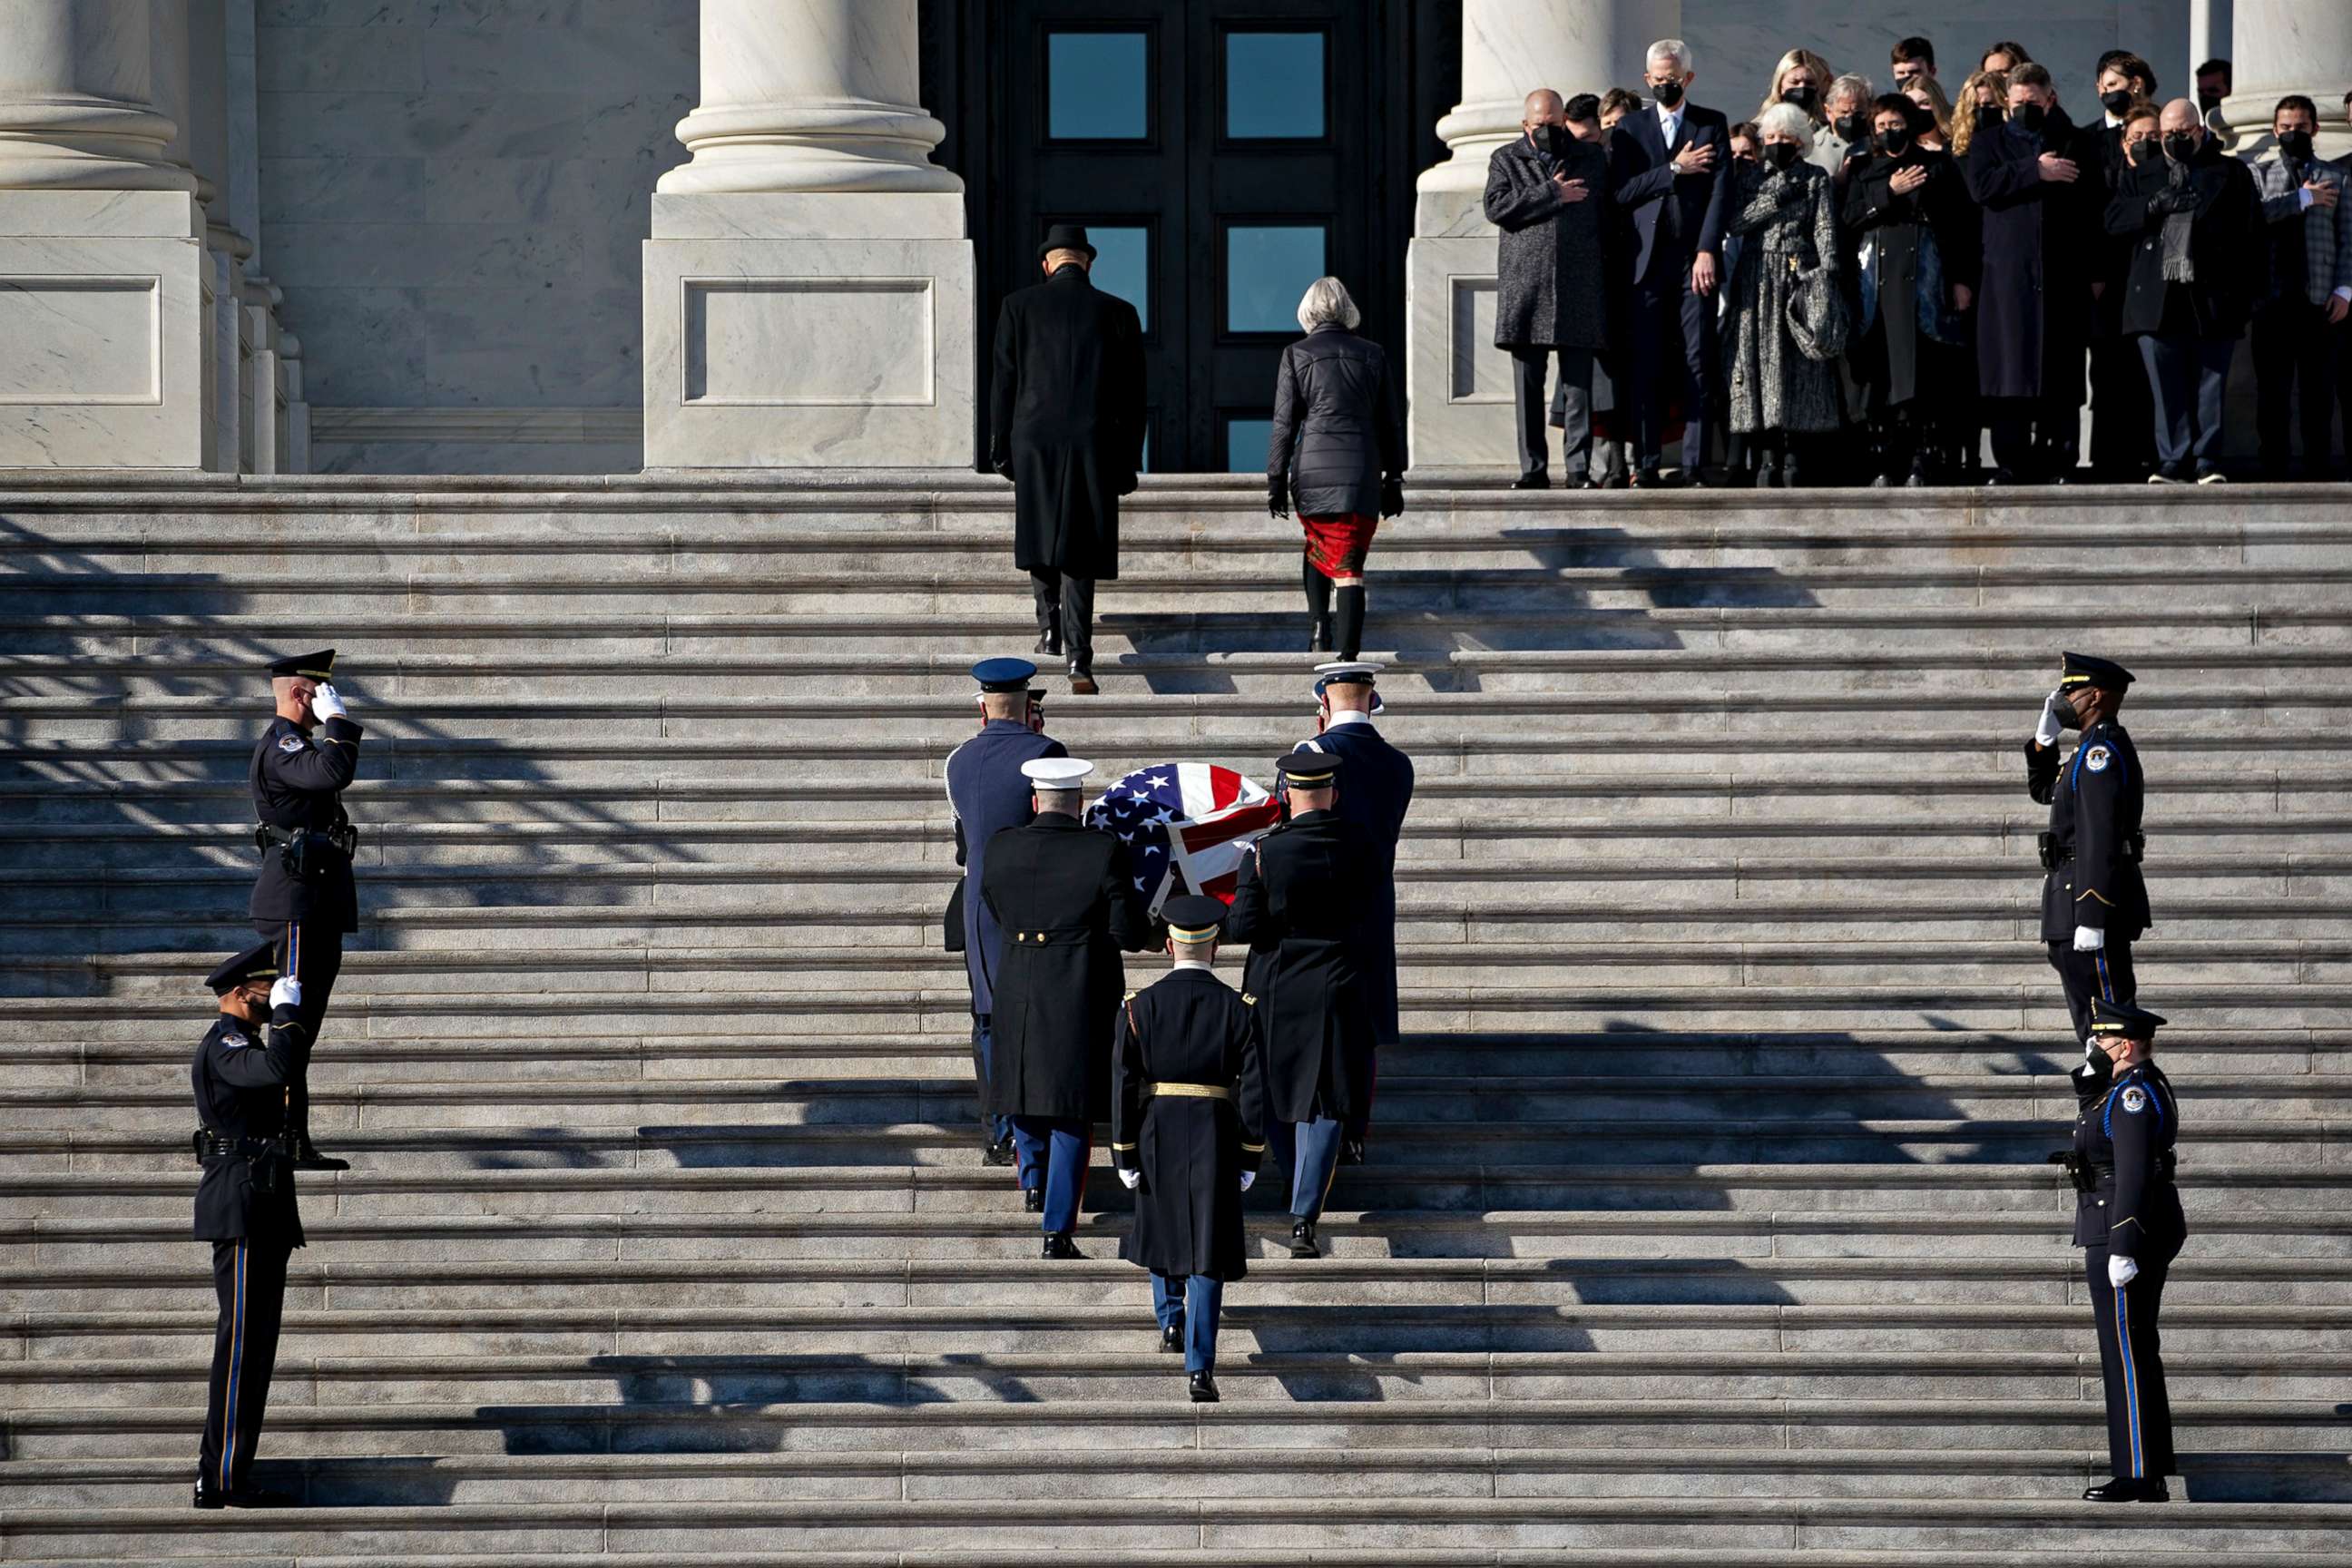 PHOTO: The casket of the late Senator Harry Reid is carried into the U.S. Capitol, on Jan. 12, 2022, in Washington, D.C., where Reid will lie in state in the Capitol Rotunda.